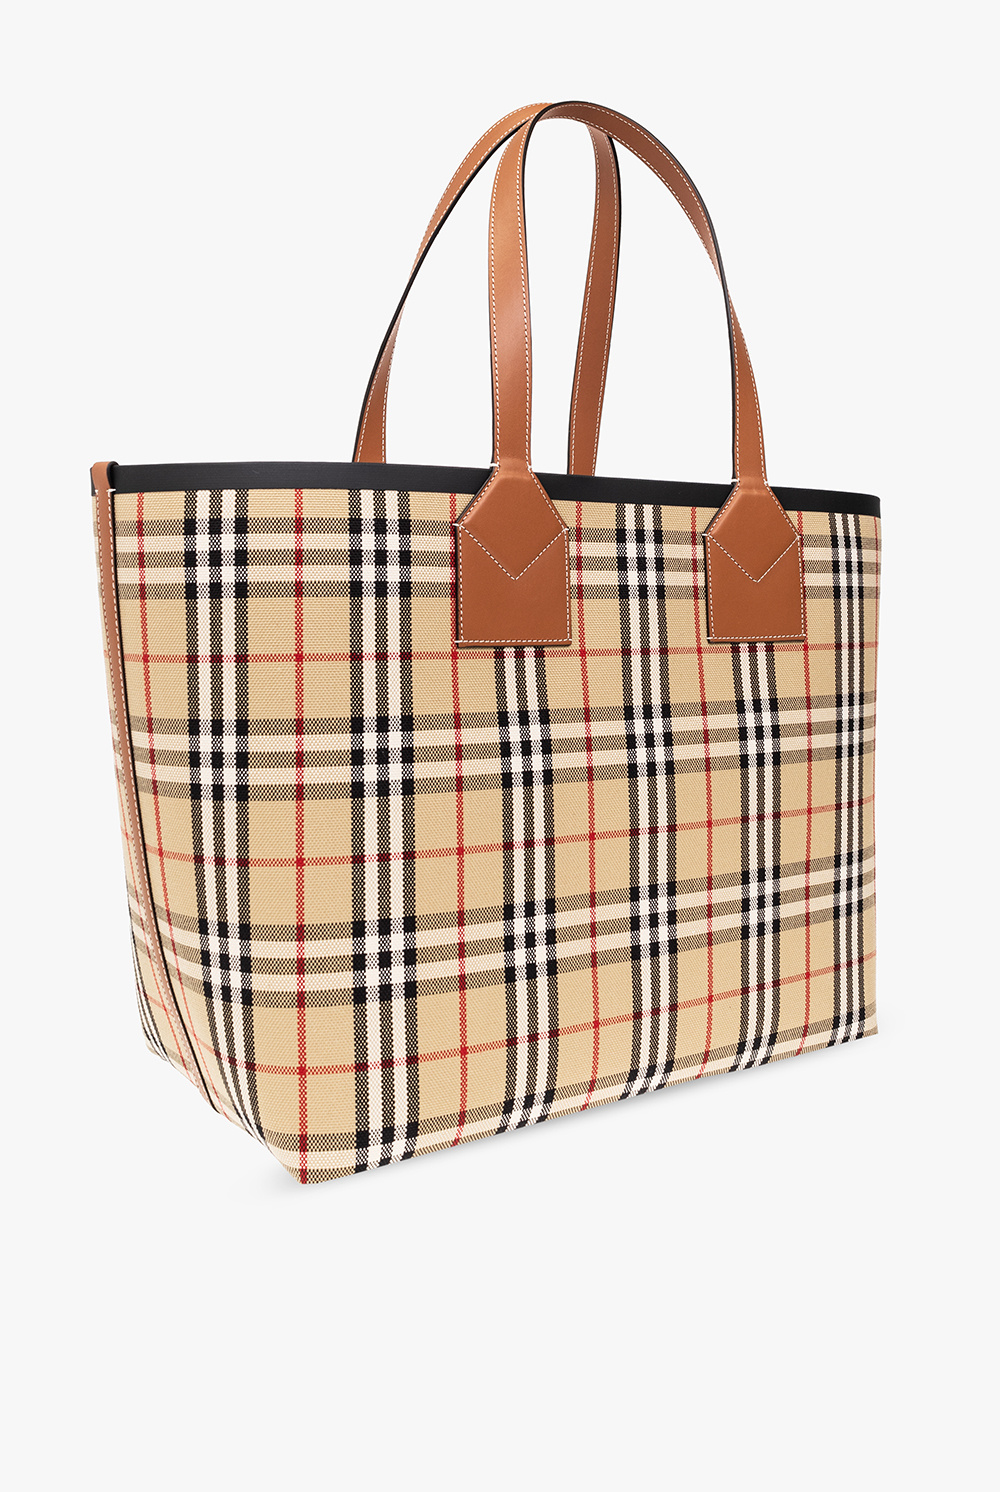 Burberry Brown/Black London Check Coated Canvas and Leather Shopper Tote